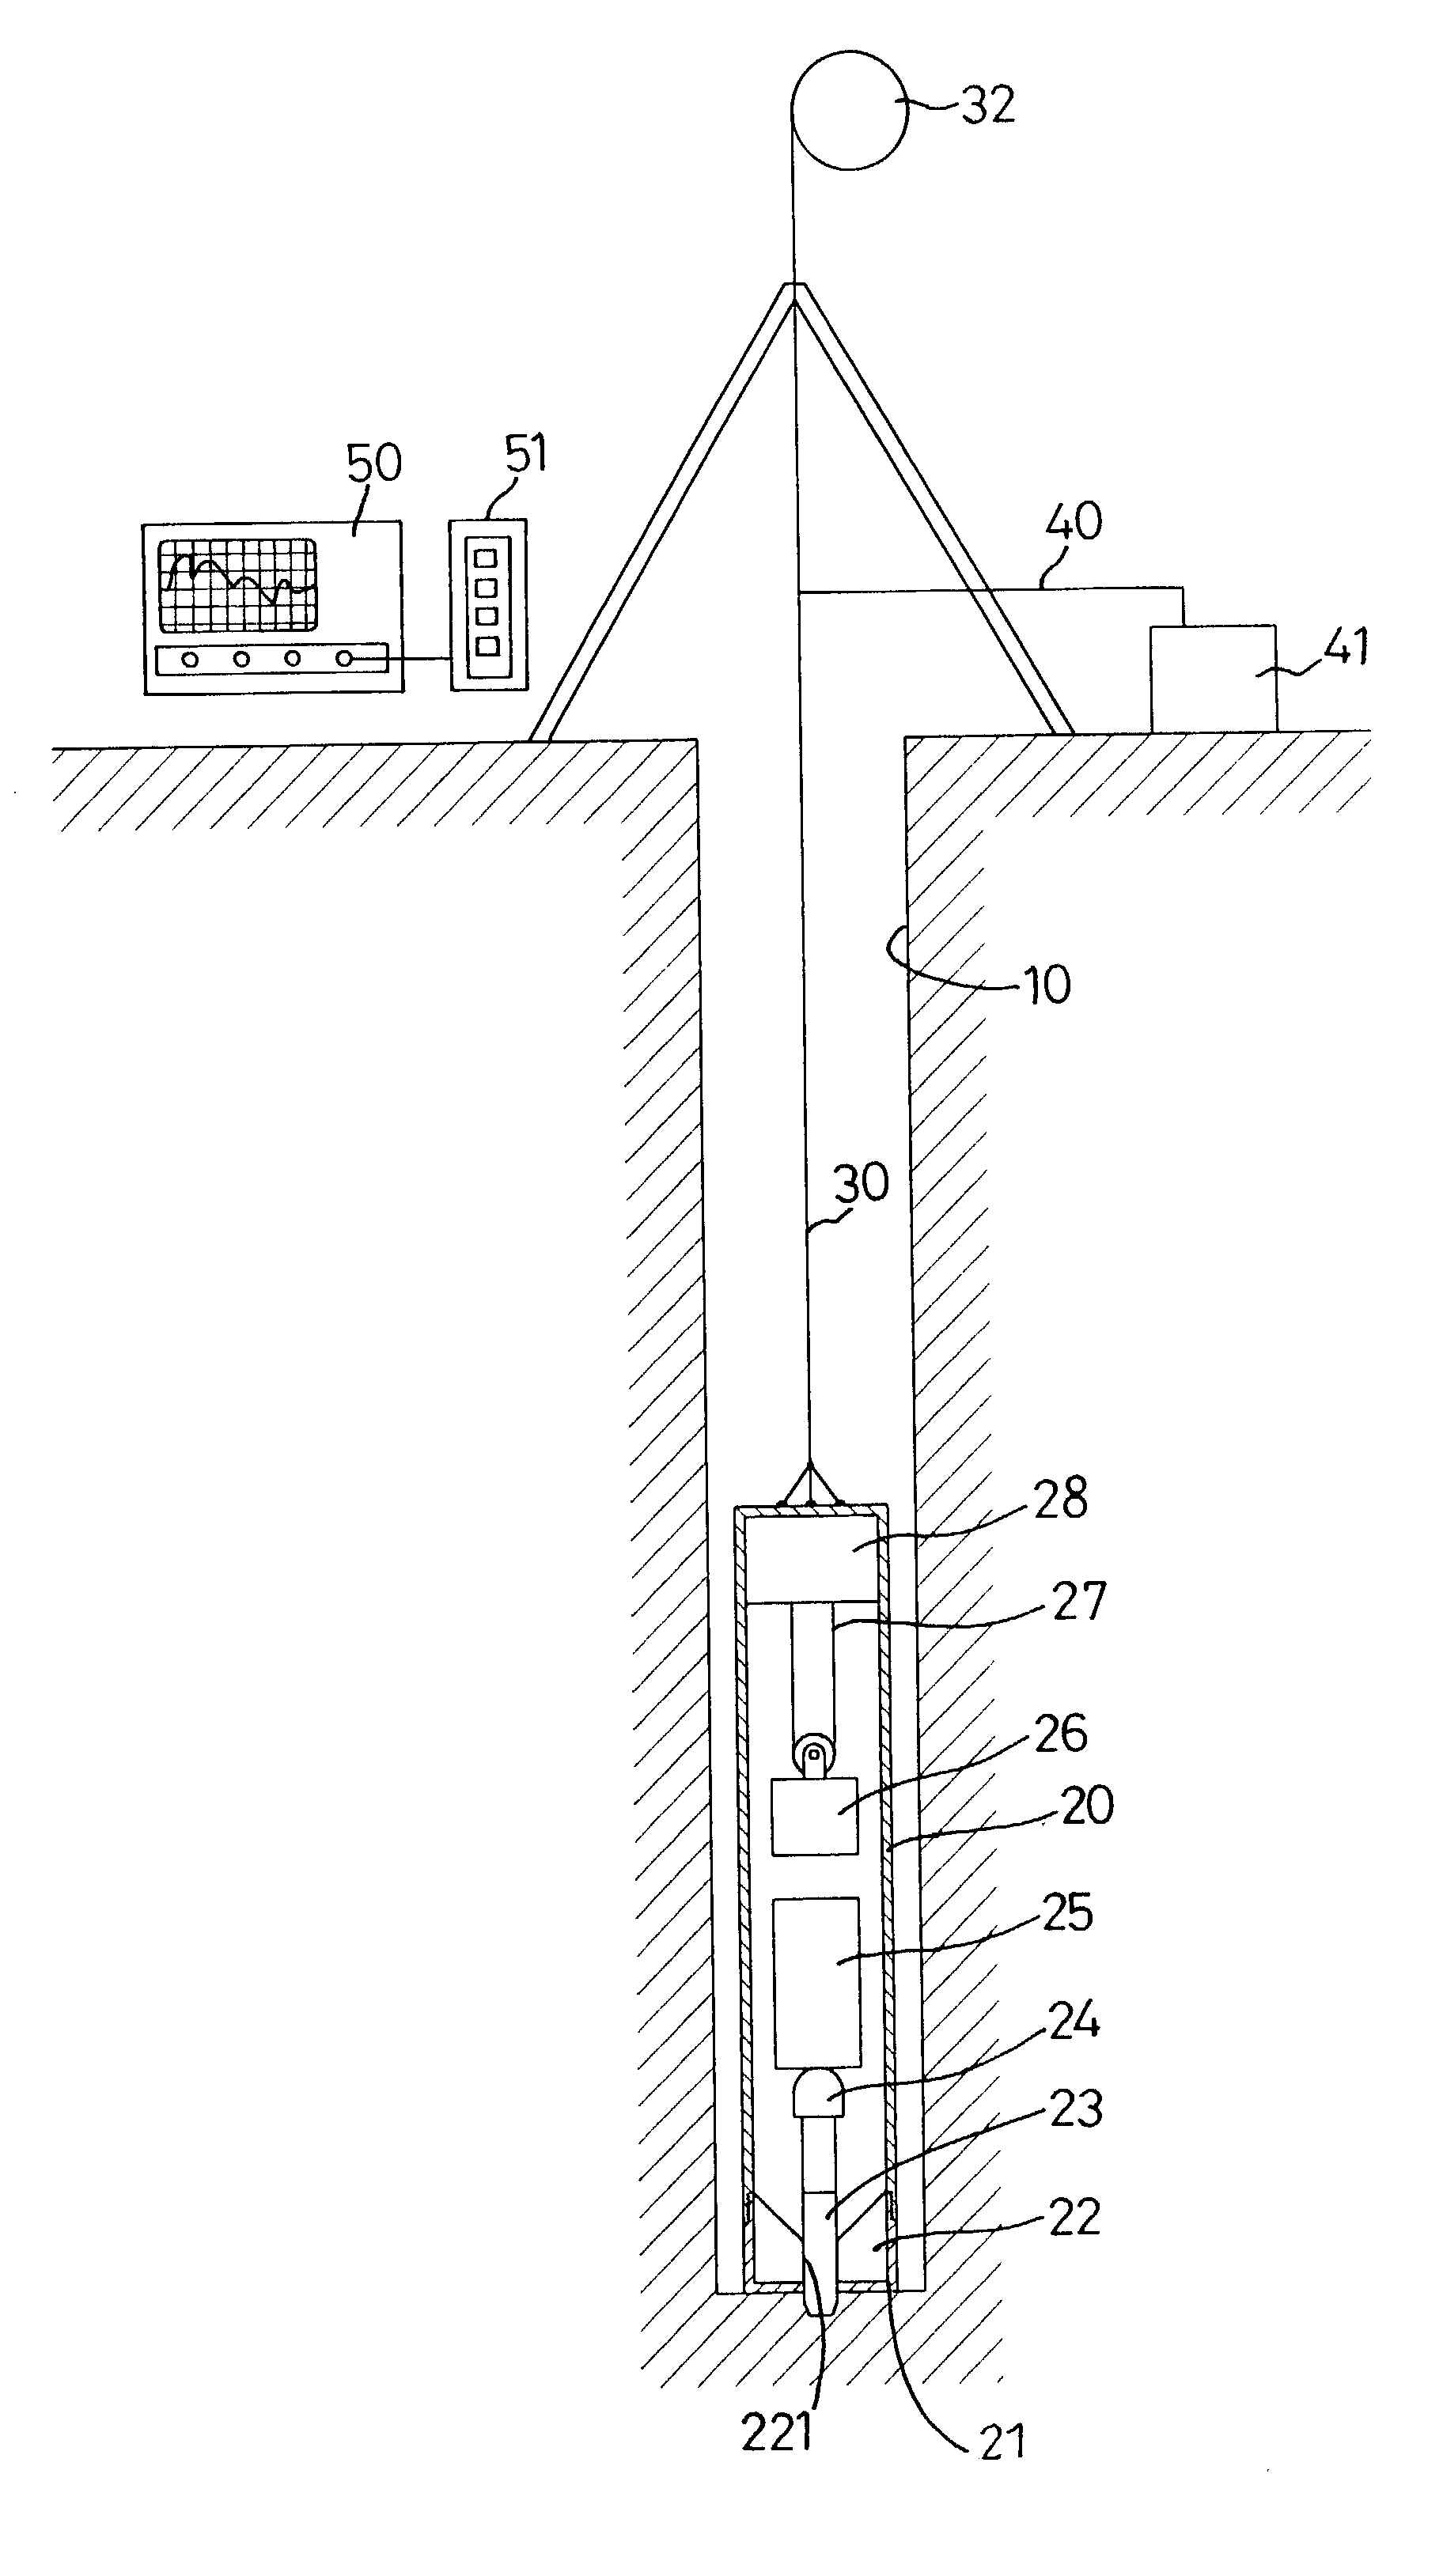 Downhole sampling method and device used in standard penetration test